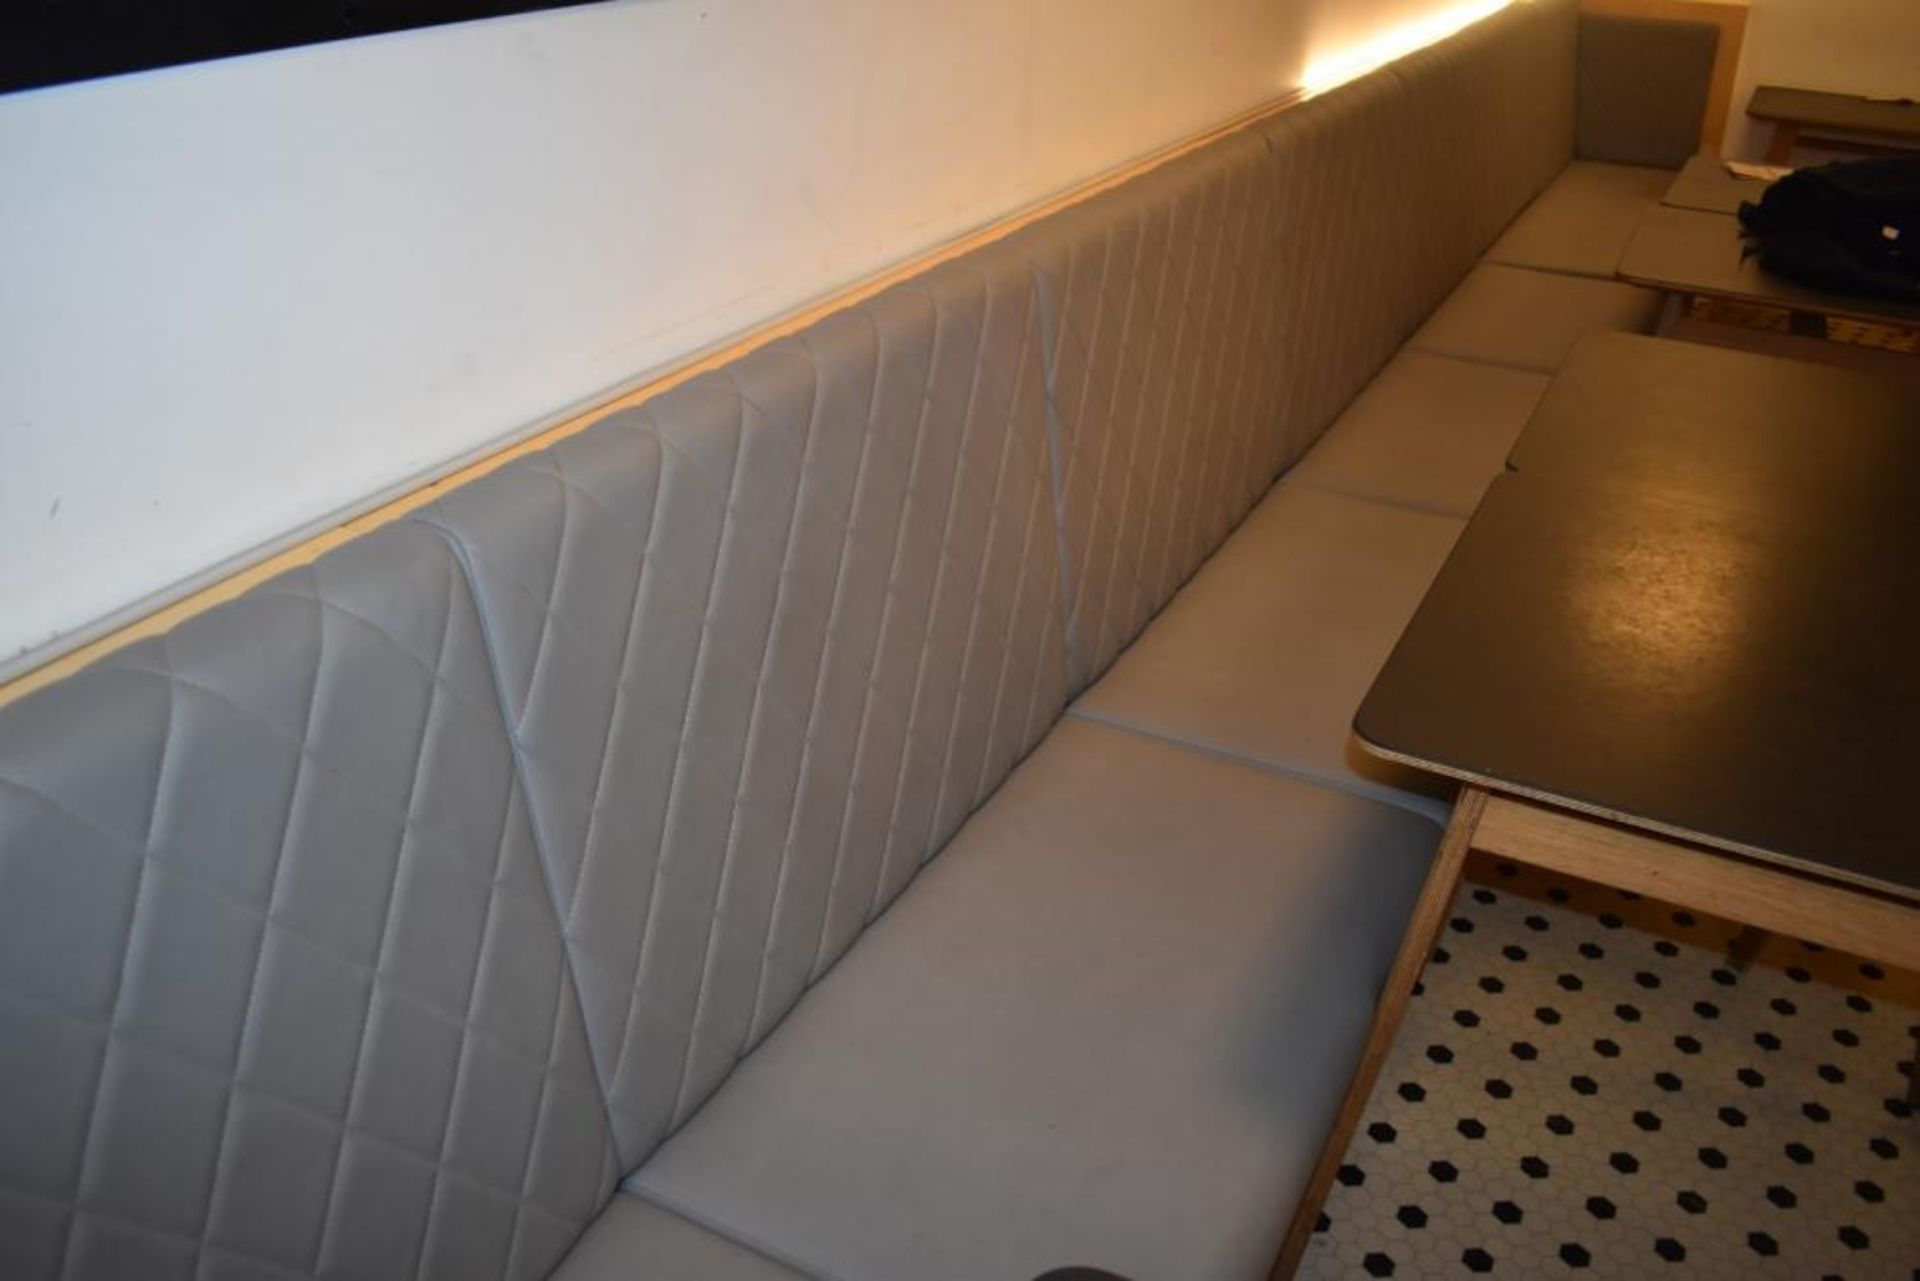 1 x Seating Banquette With Diamond Faux Leather Design Upholstery in Grey - Approx 25ft in - Image 4 of 5